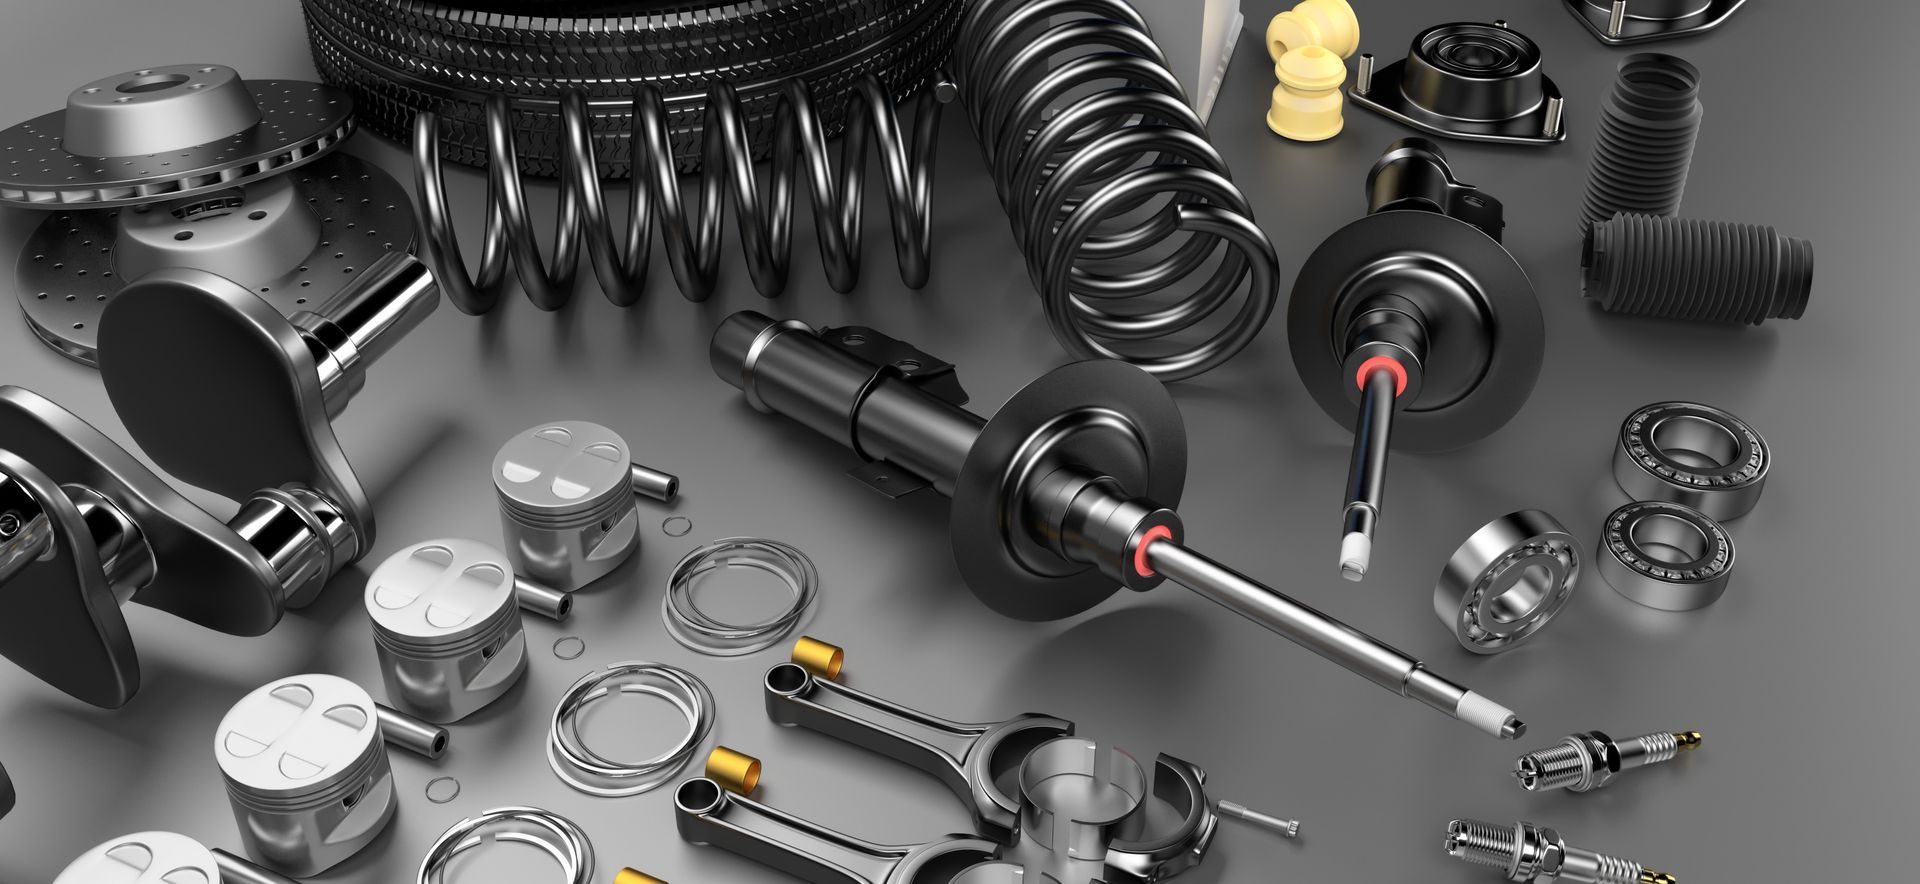 Easy To Spot Signs Of Damaged or Broken Coil Springs | Mike's Auto Service Center
